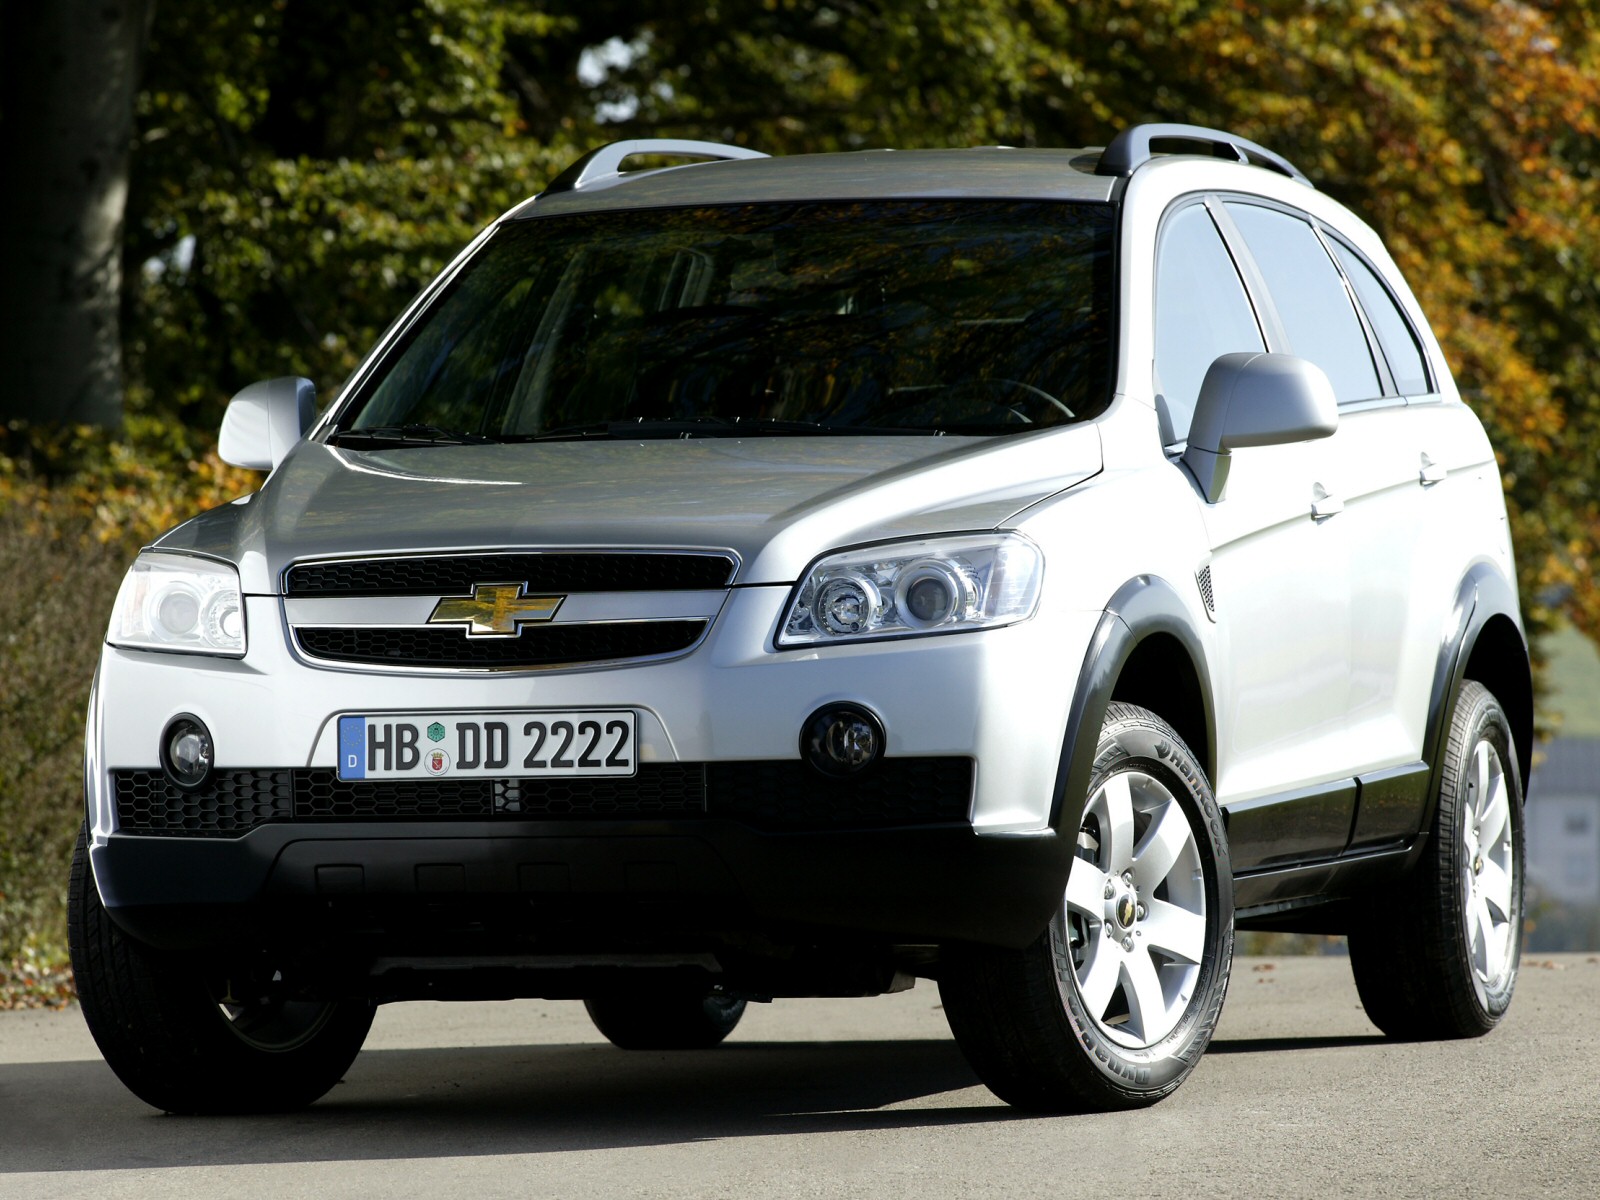 Car in pictures car photo gallery » Chevrolet Captiva